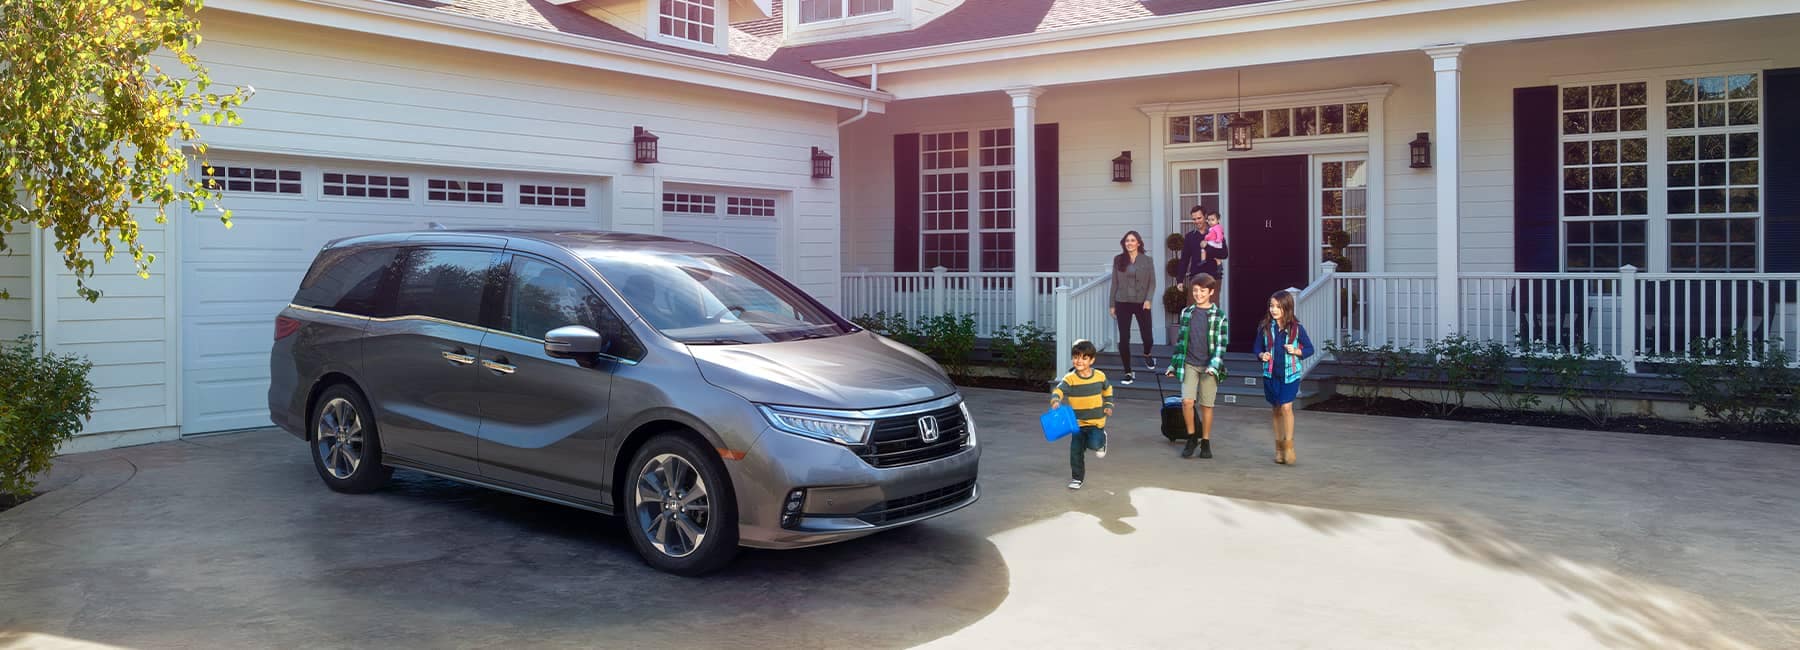 2021 Silver Honda Odyssey parked in front of a white home with black shutters_mobile